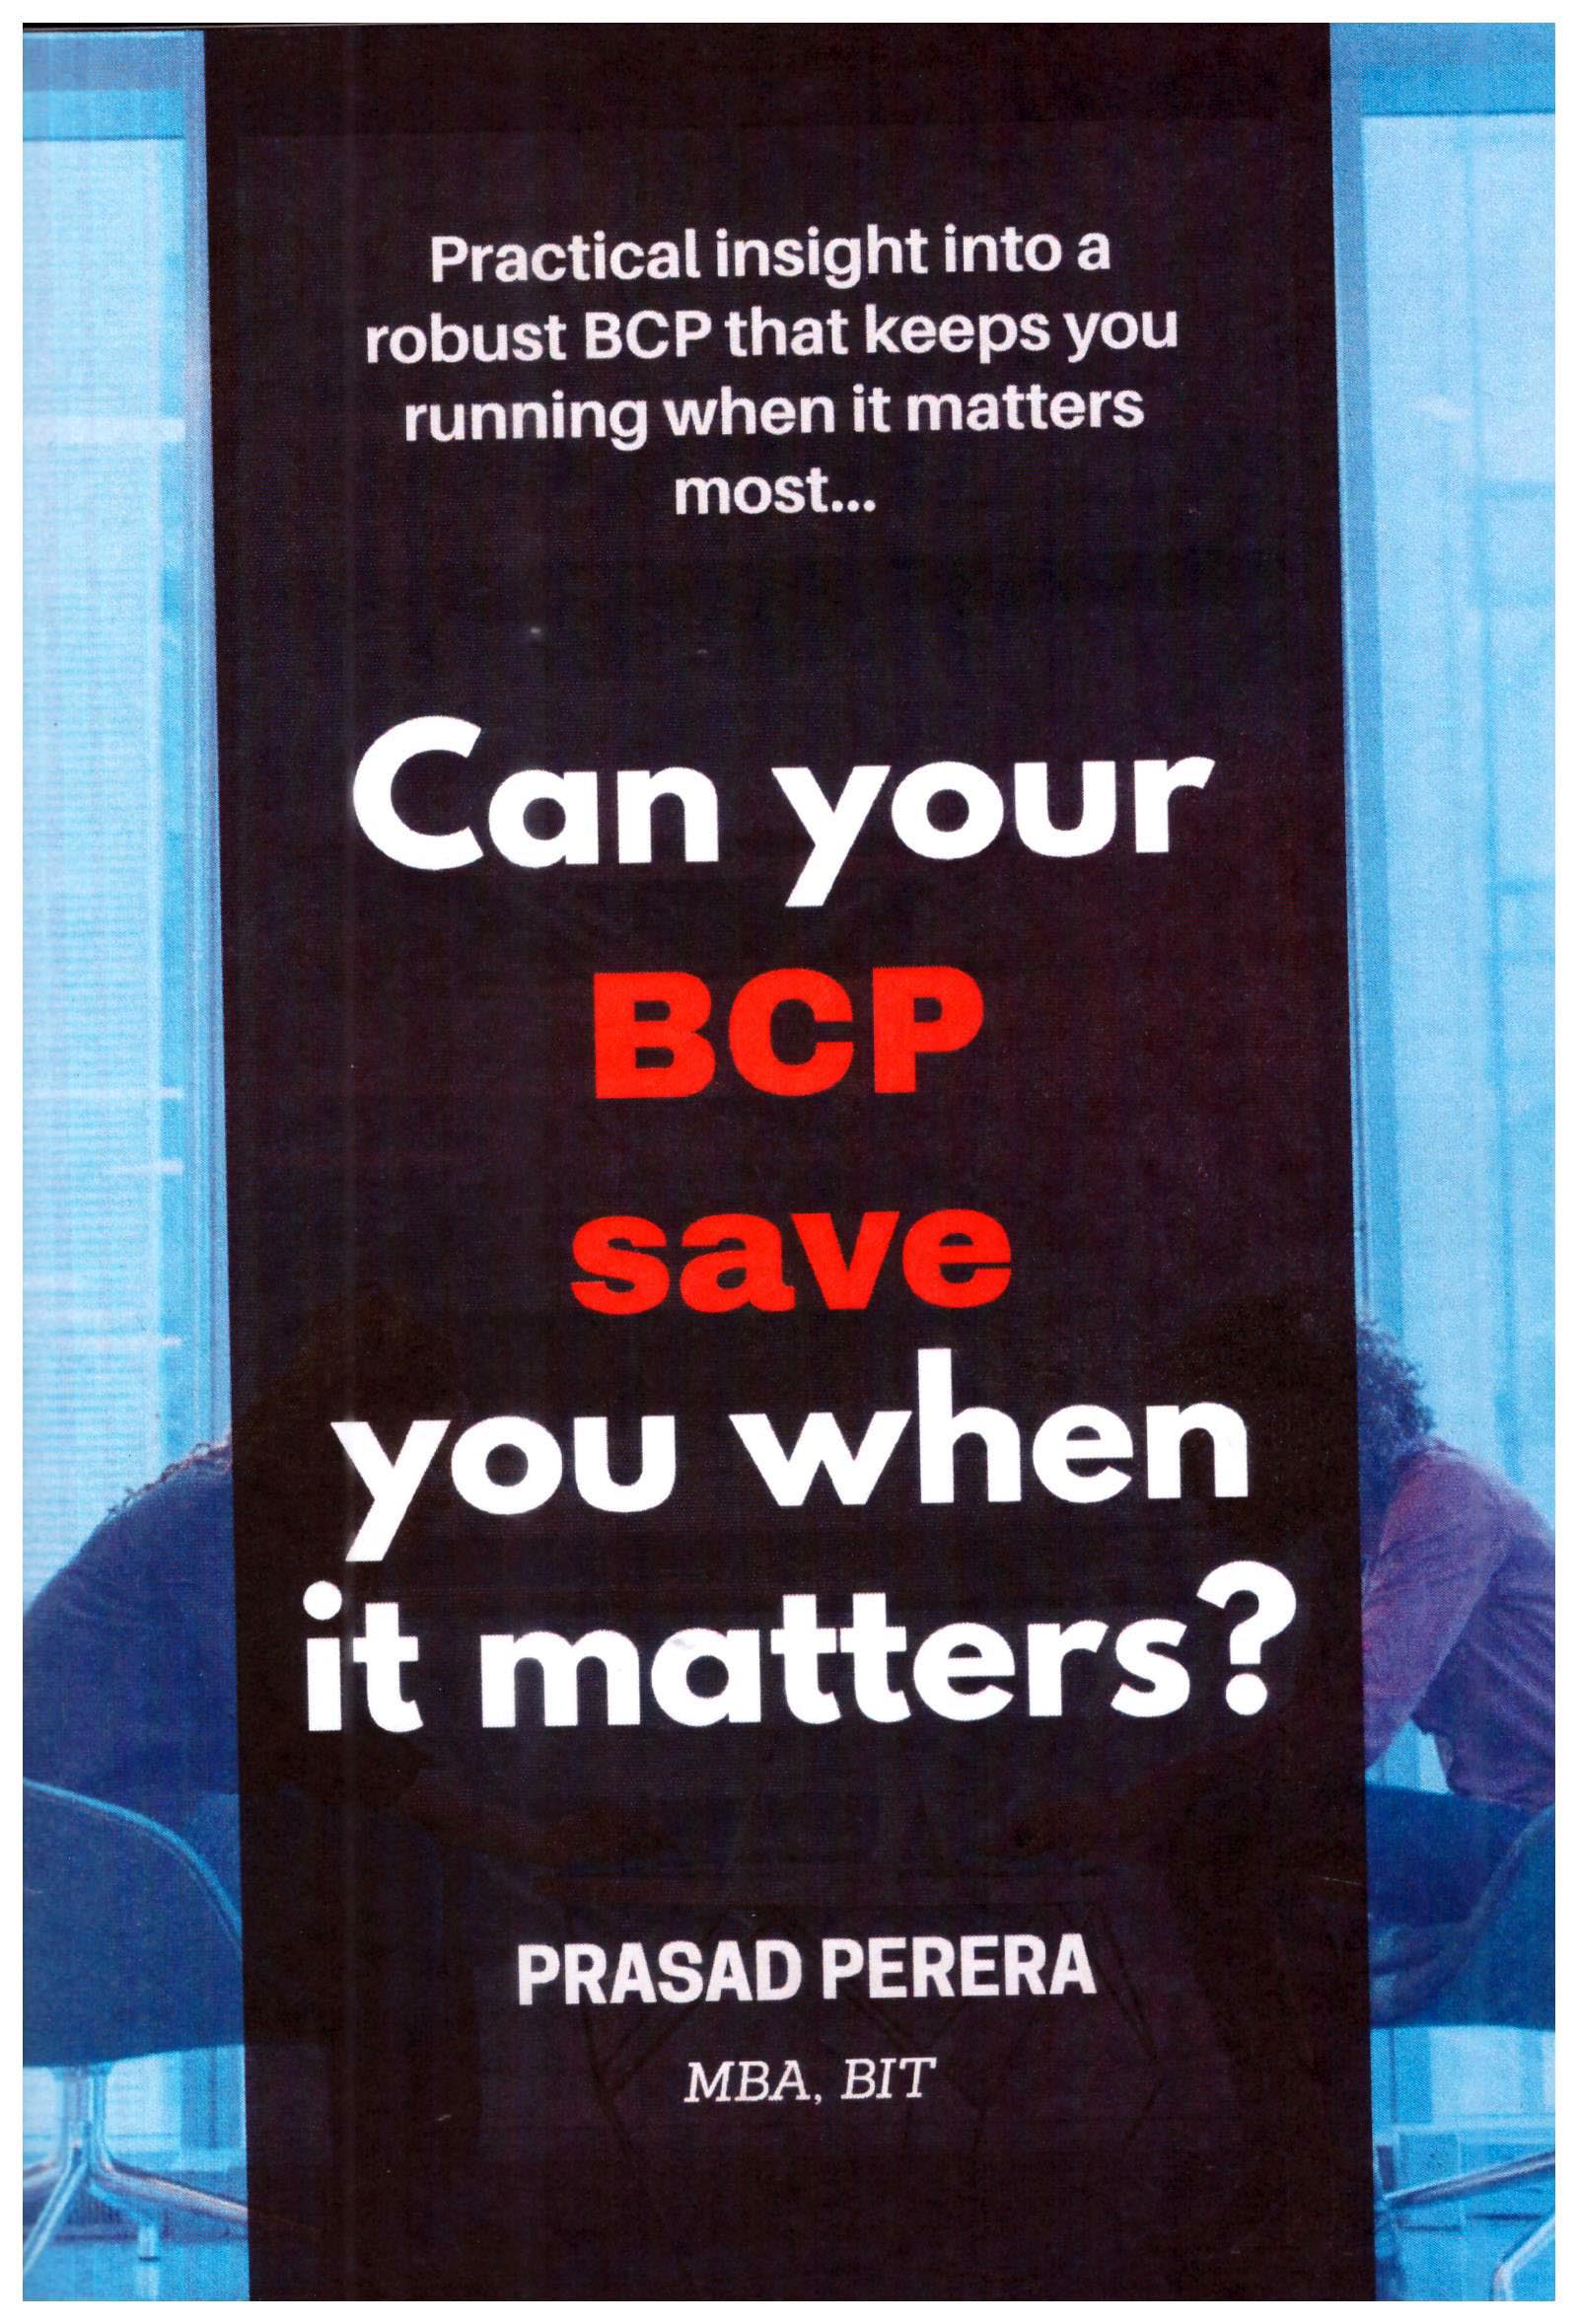 Can Your BCP Save You When it Matters